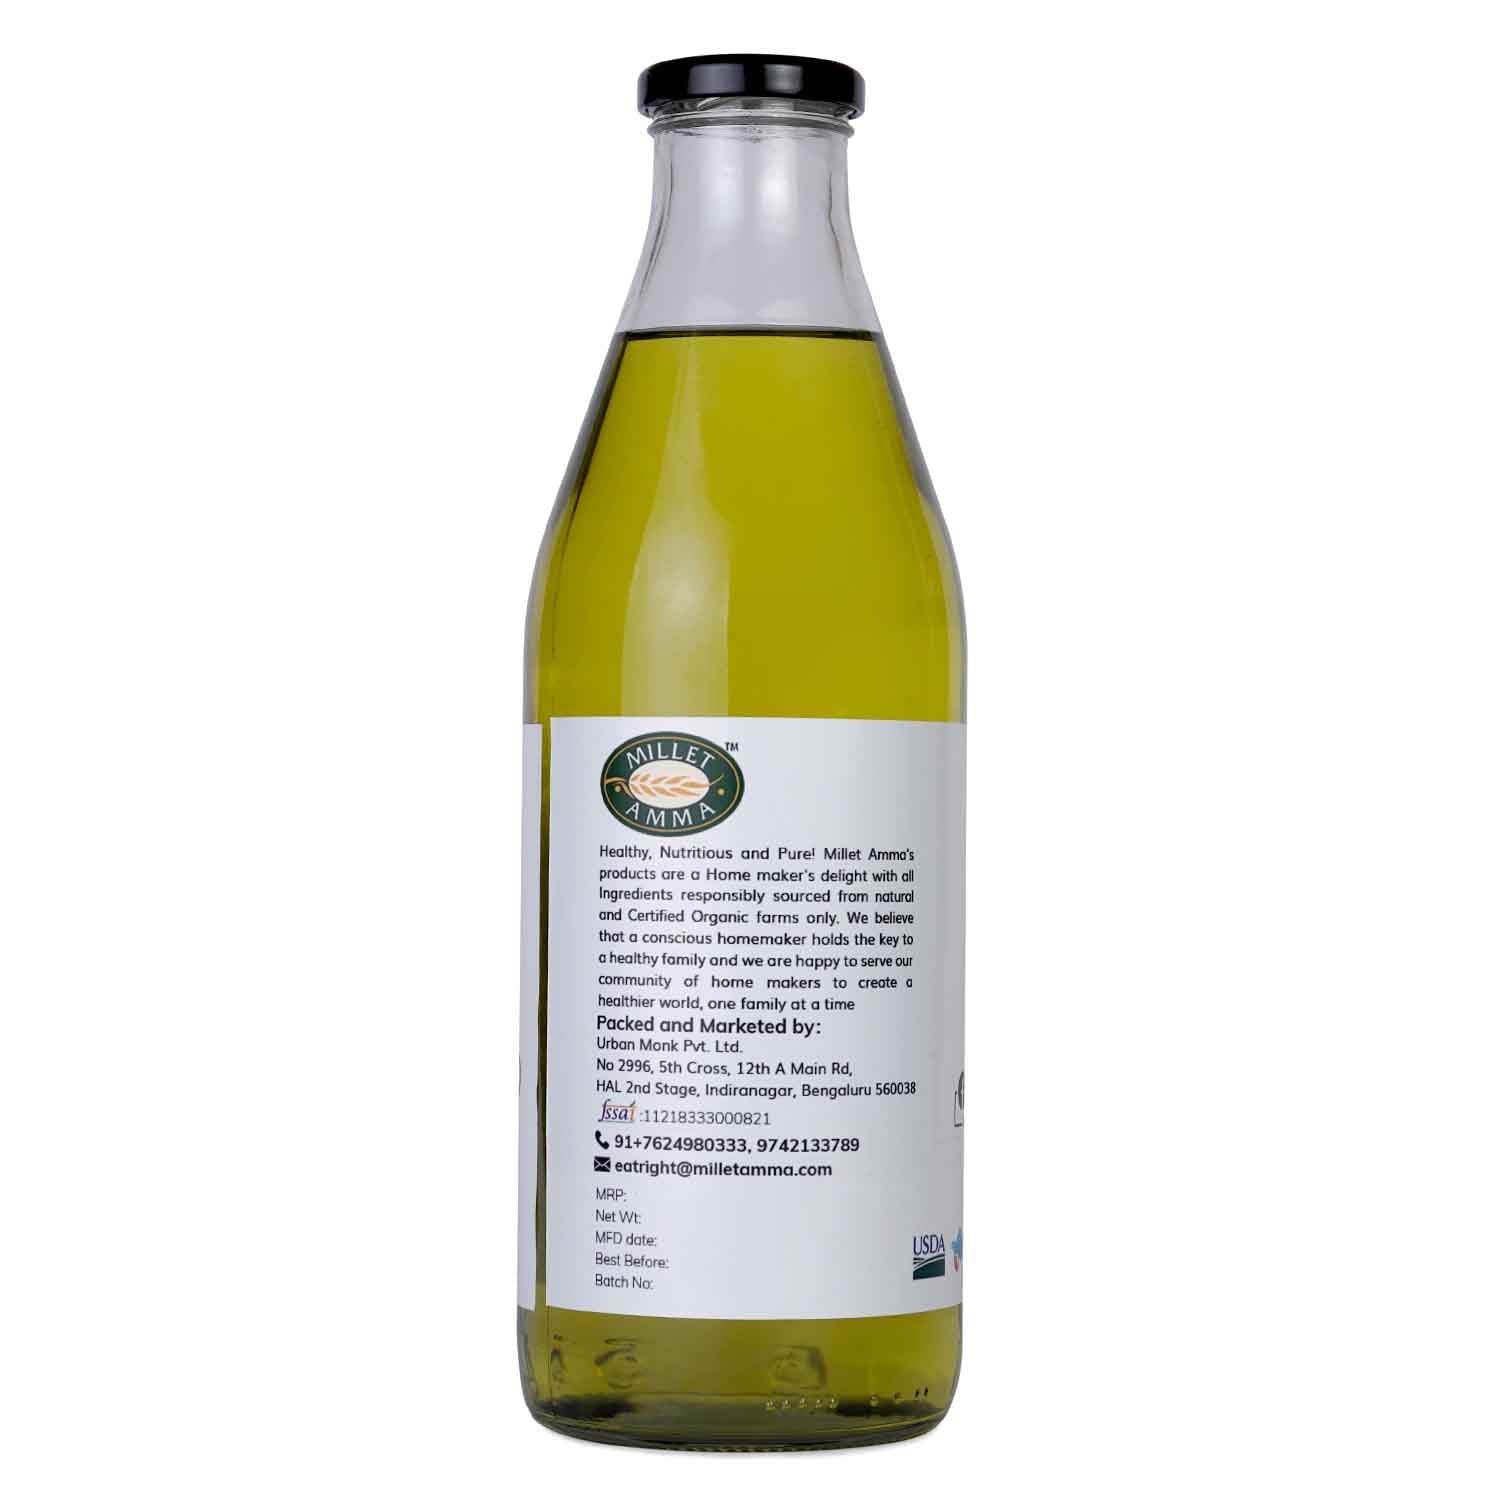 Millet Amma’s Organic Cold Pressed Extra Virgin Olive Oil- Introducing to you our highly nutritious and organic Cold Pressed Extra Virgin Oil.  Extracted by pressing ripened Olive fruits in an even cold temperature to ensure nutrients are retained. It is rich in healthy monounsaturated fats, antioxidants, and anti-inflammatory properties.